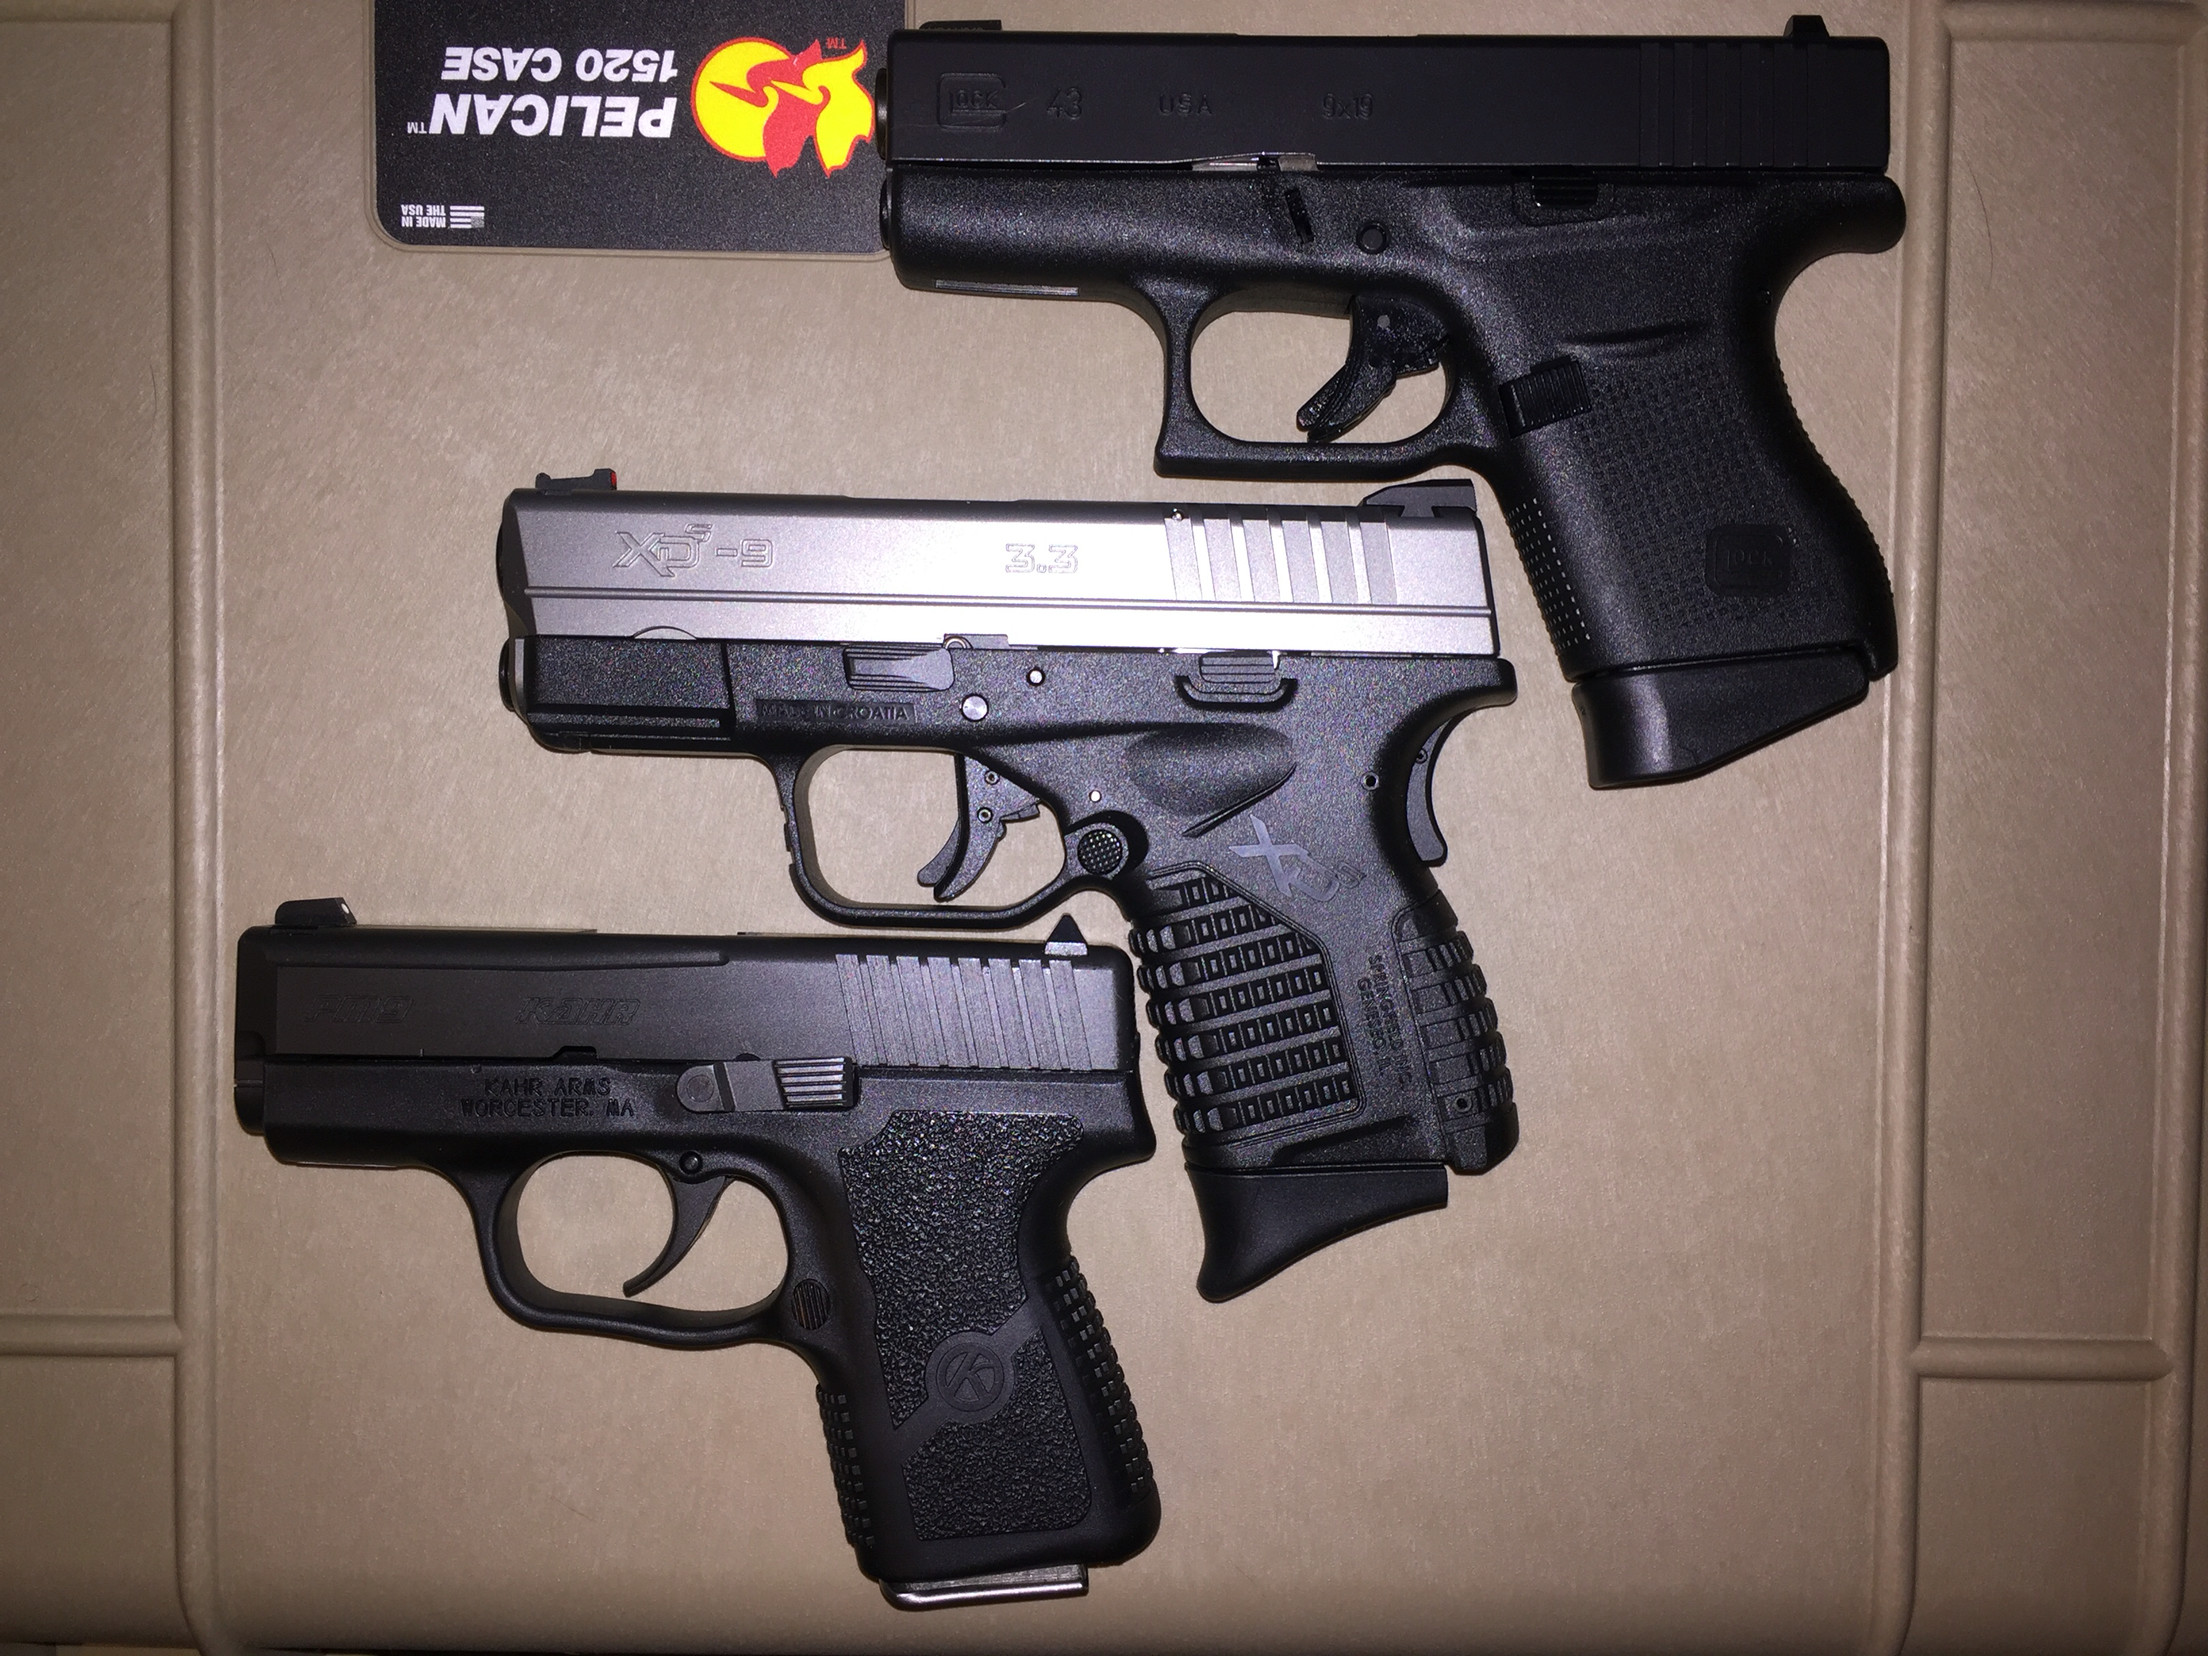 2208x1656 Glock 43 vs XDs 9 vs Kahr PM9 Loading that magazine is a pain! Get